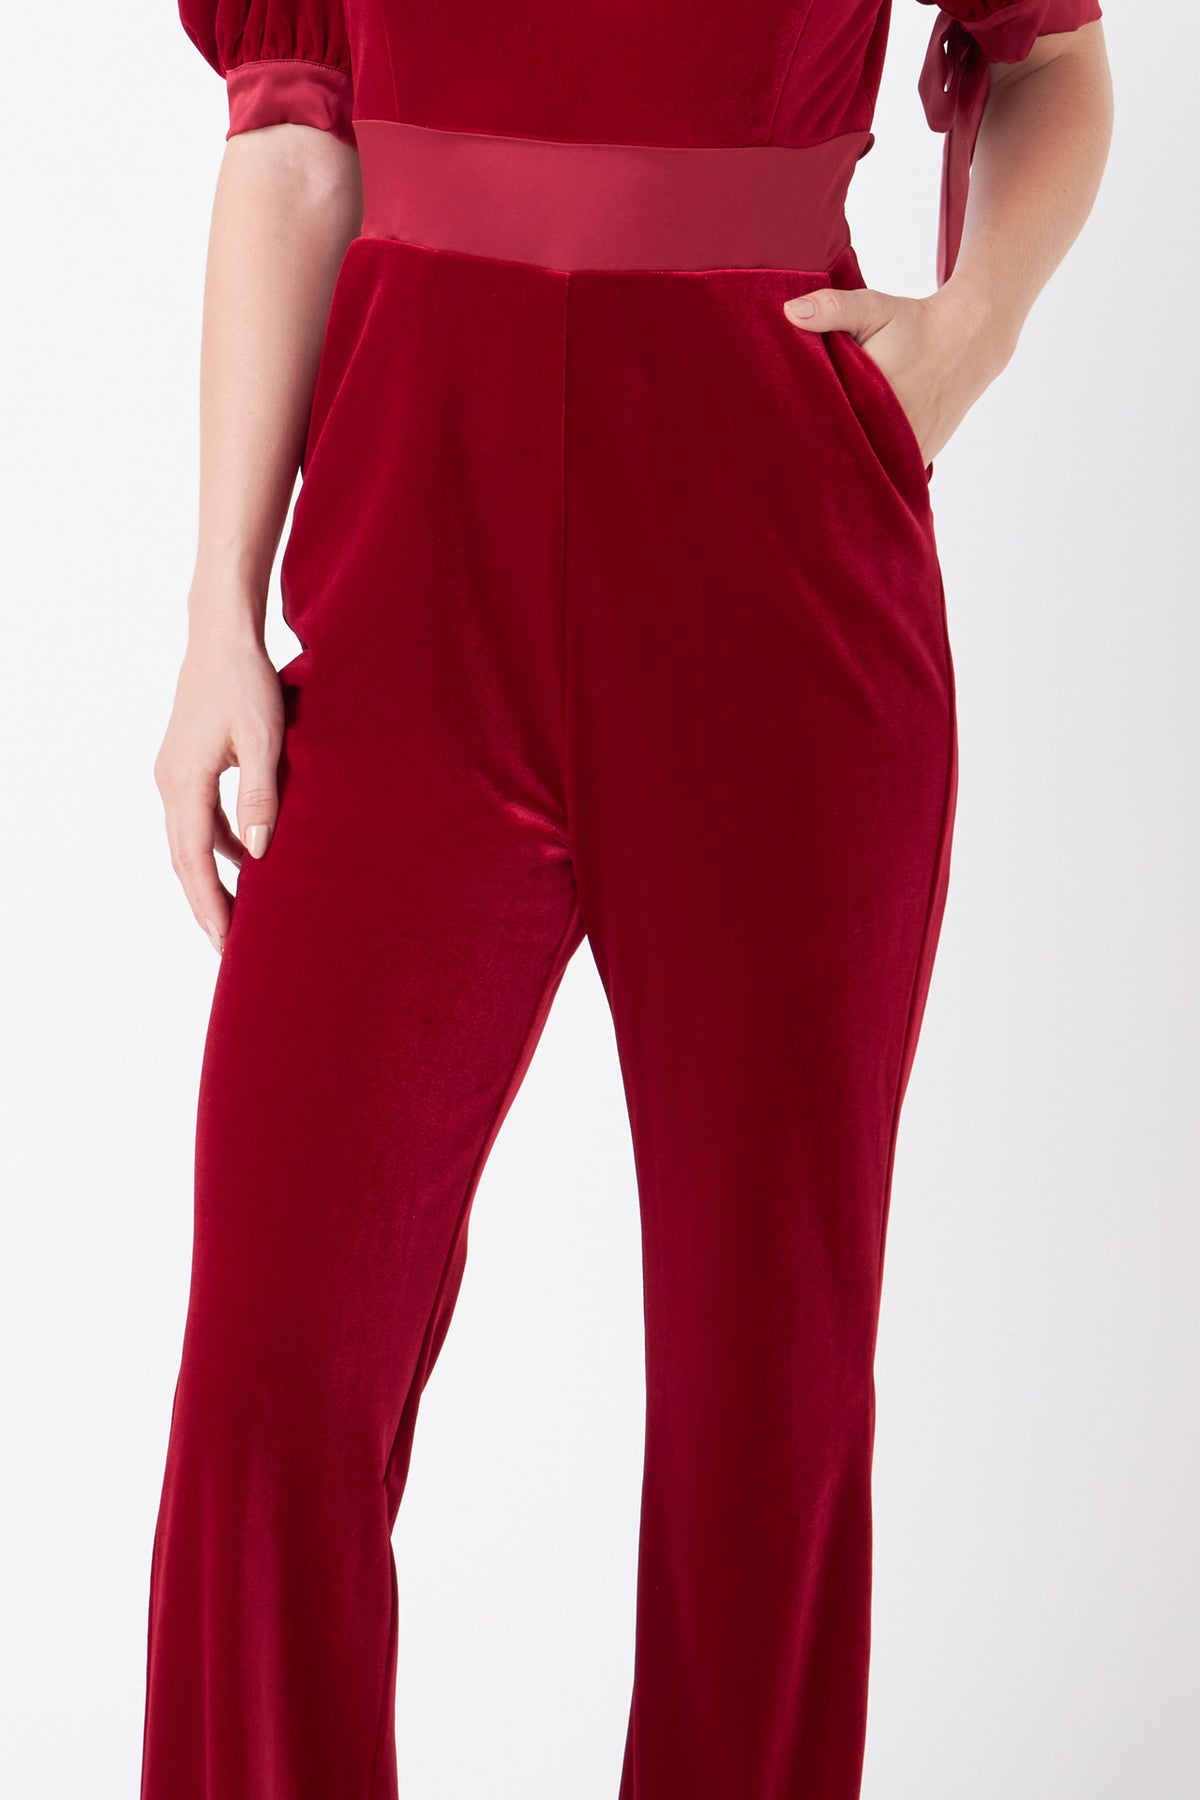 ENDLESS ROSE - Bow Tie Sleeve Velvet Jumpsuit - JUMPSUITS available at Objectrare